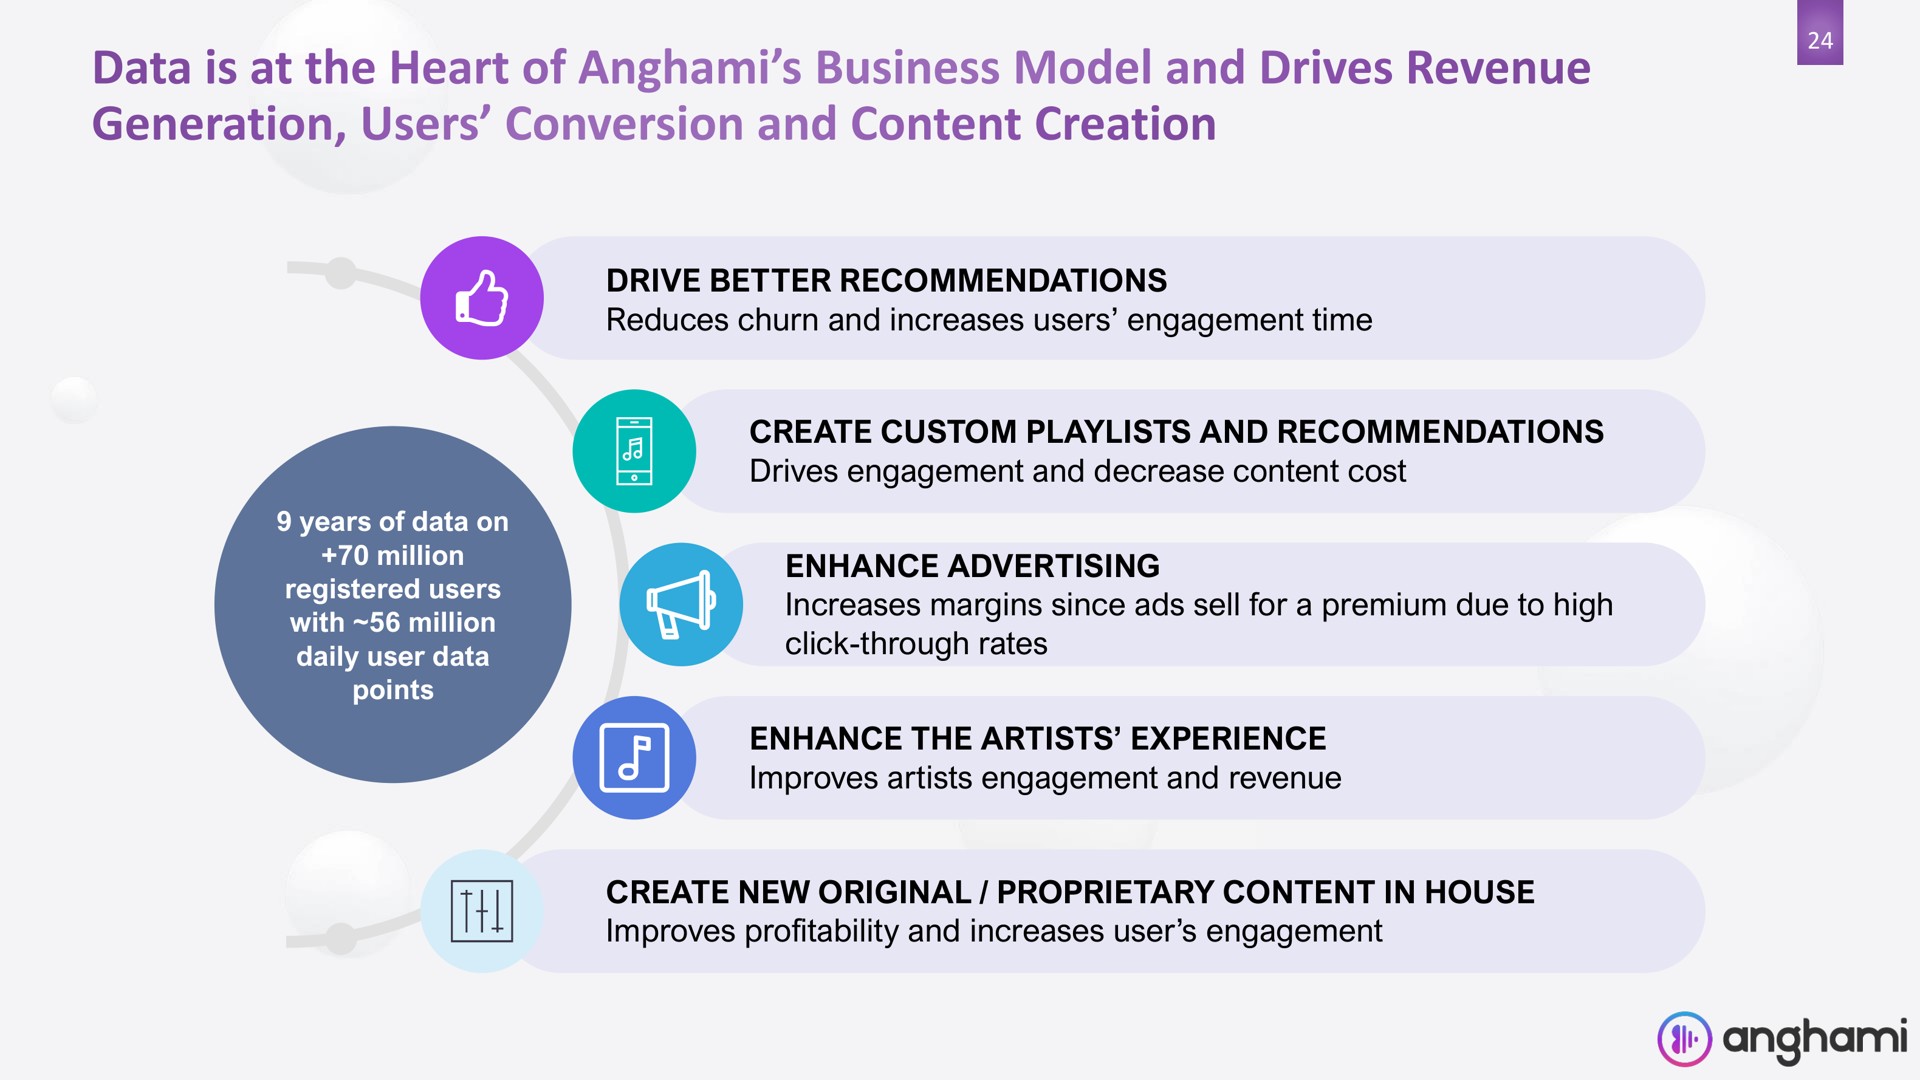 data is at the heart of business model and drives revenue | Anghami